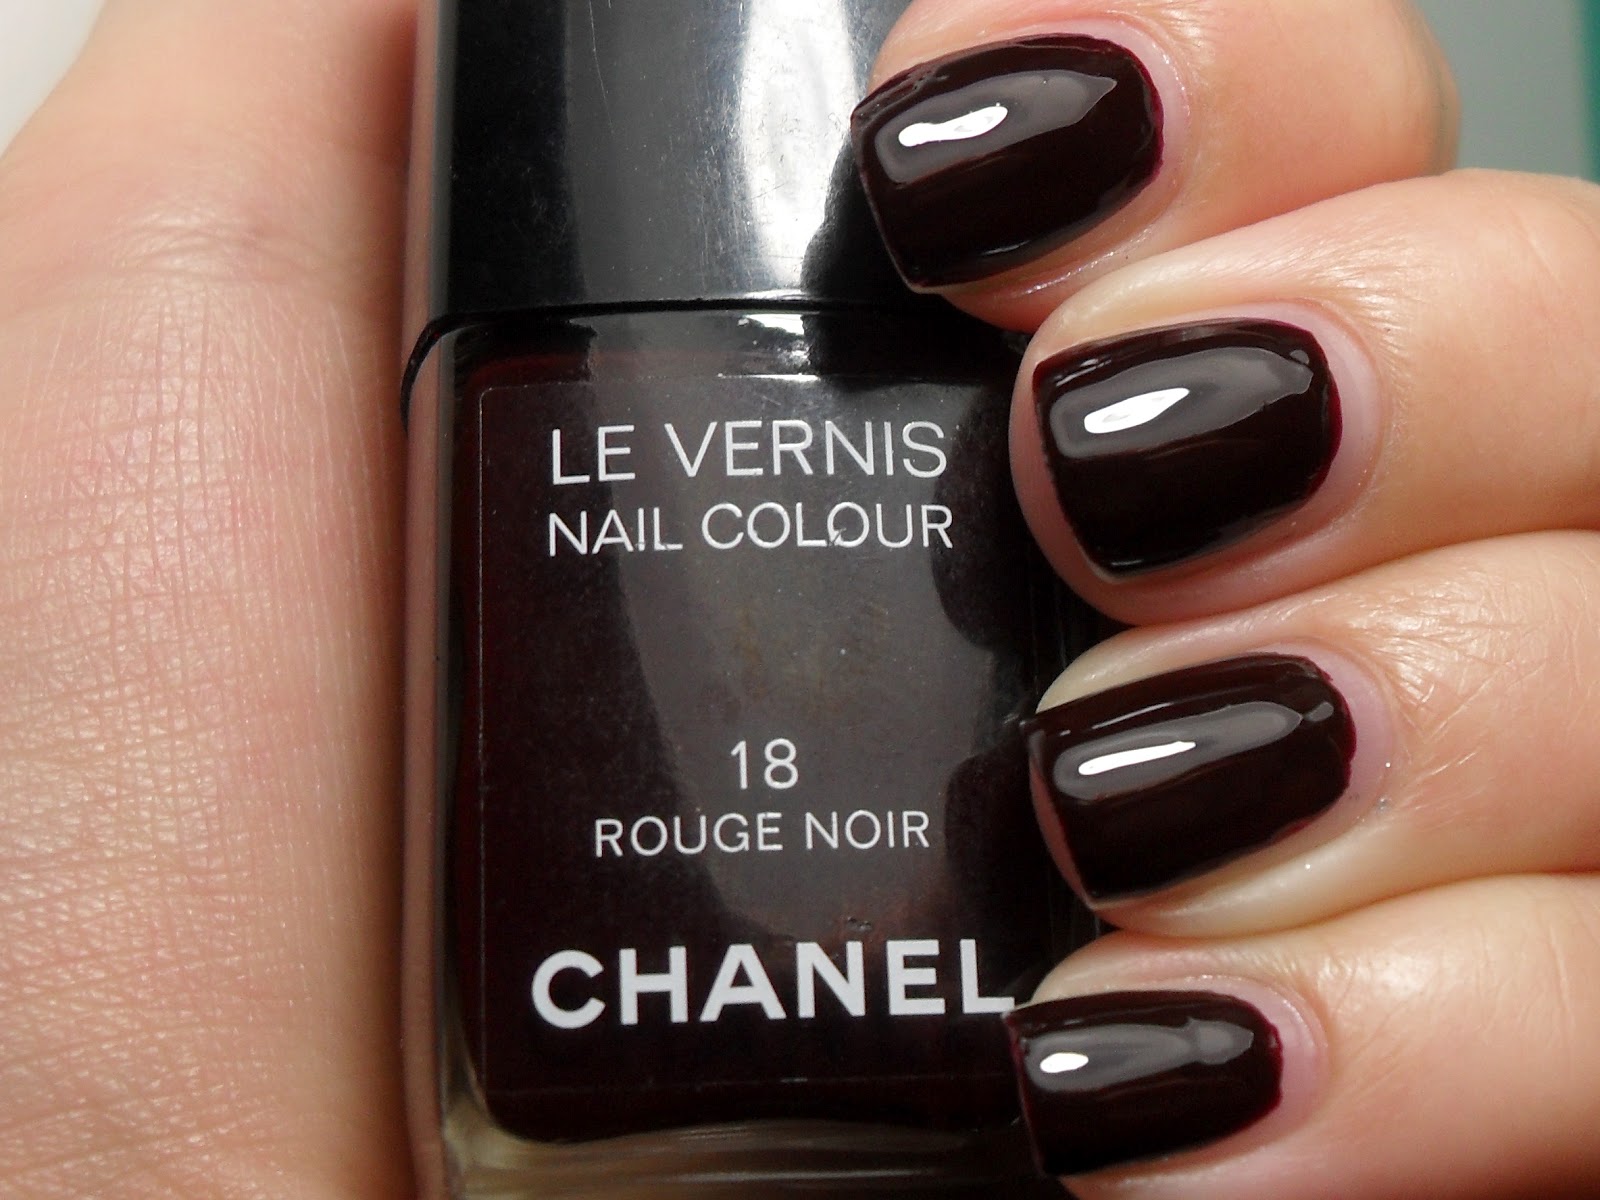 Chanel Le Vernis Longwear Nail Colour in Vamp - wide 8